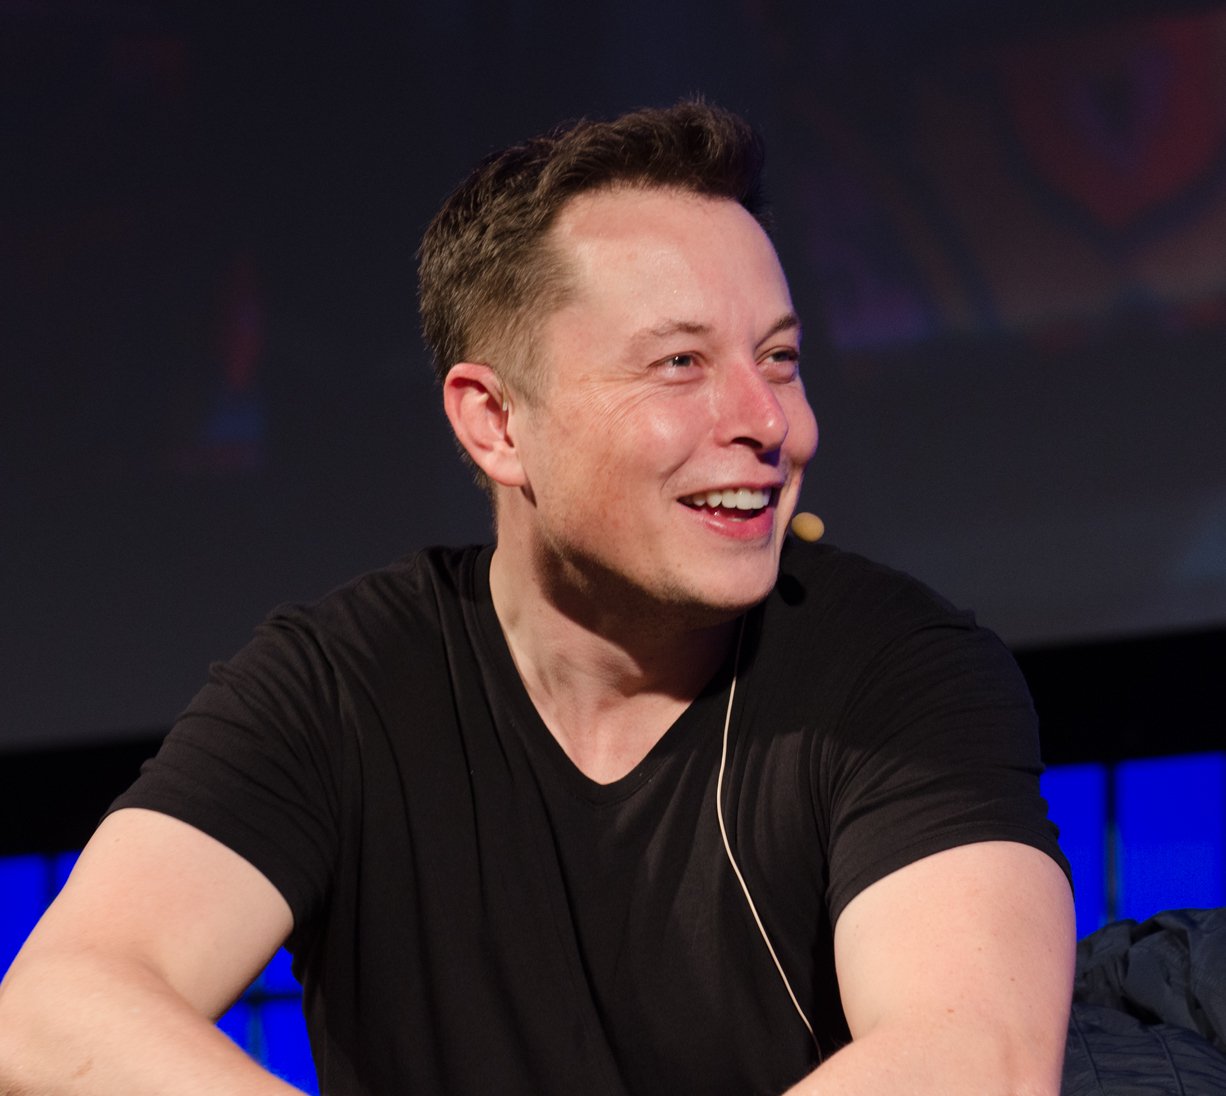 Musk Impostors Hack Lawmaker, Publisher Accounts In New Crypto Scams